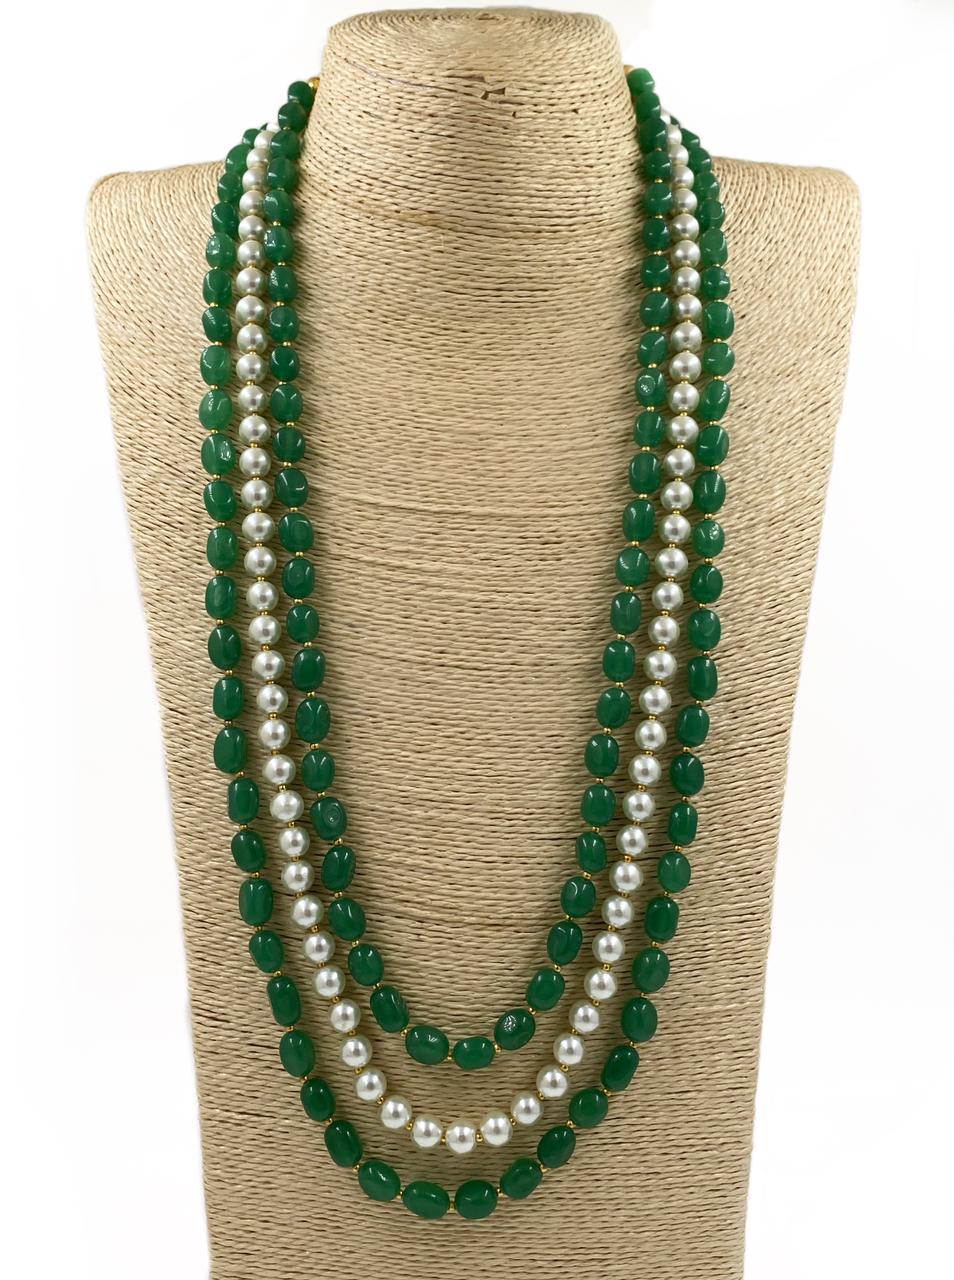 Semi Precious Triple Layered Green Jade And Pearl Mala Necklace For Men And Women Beads Jewellery